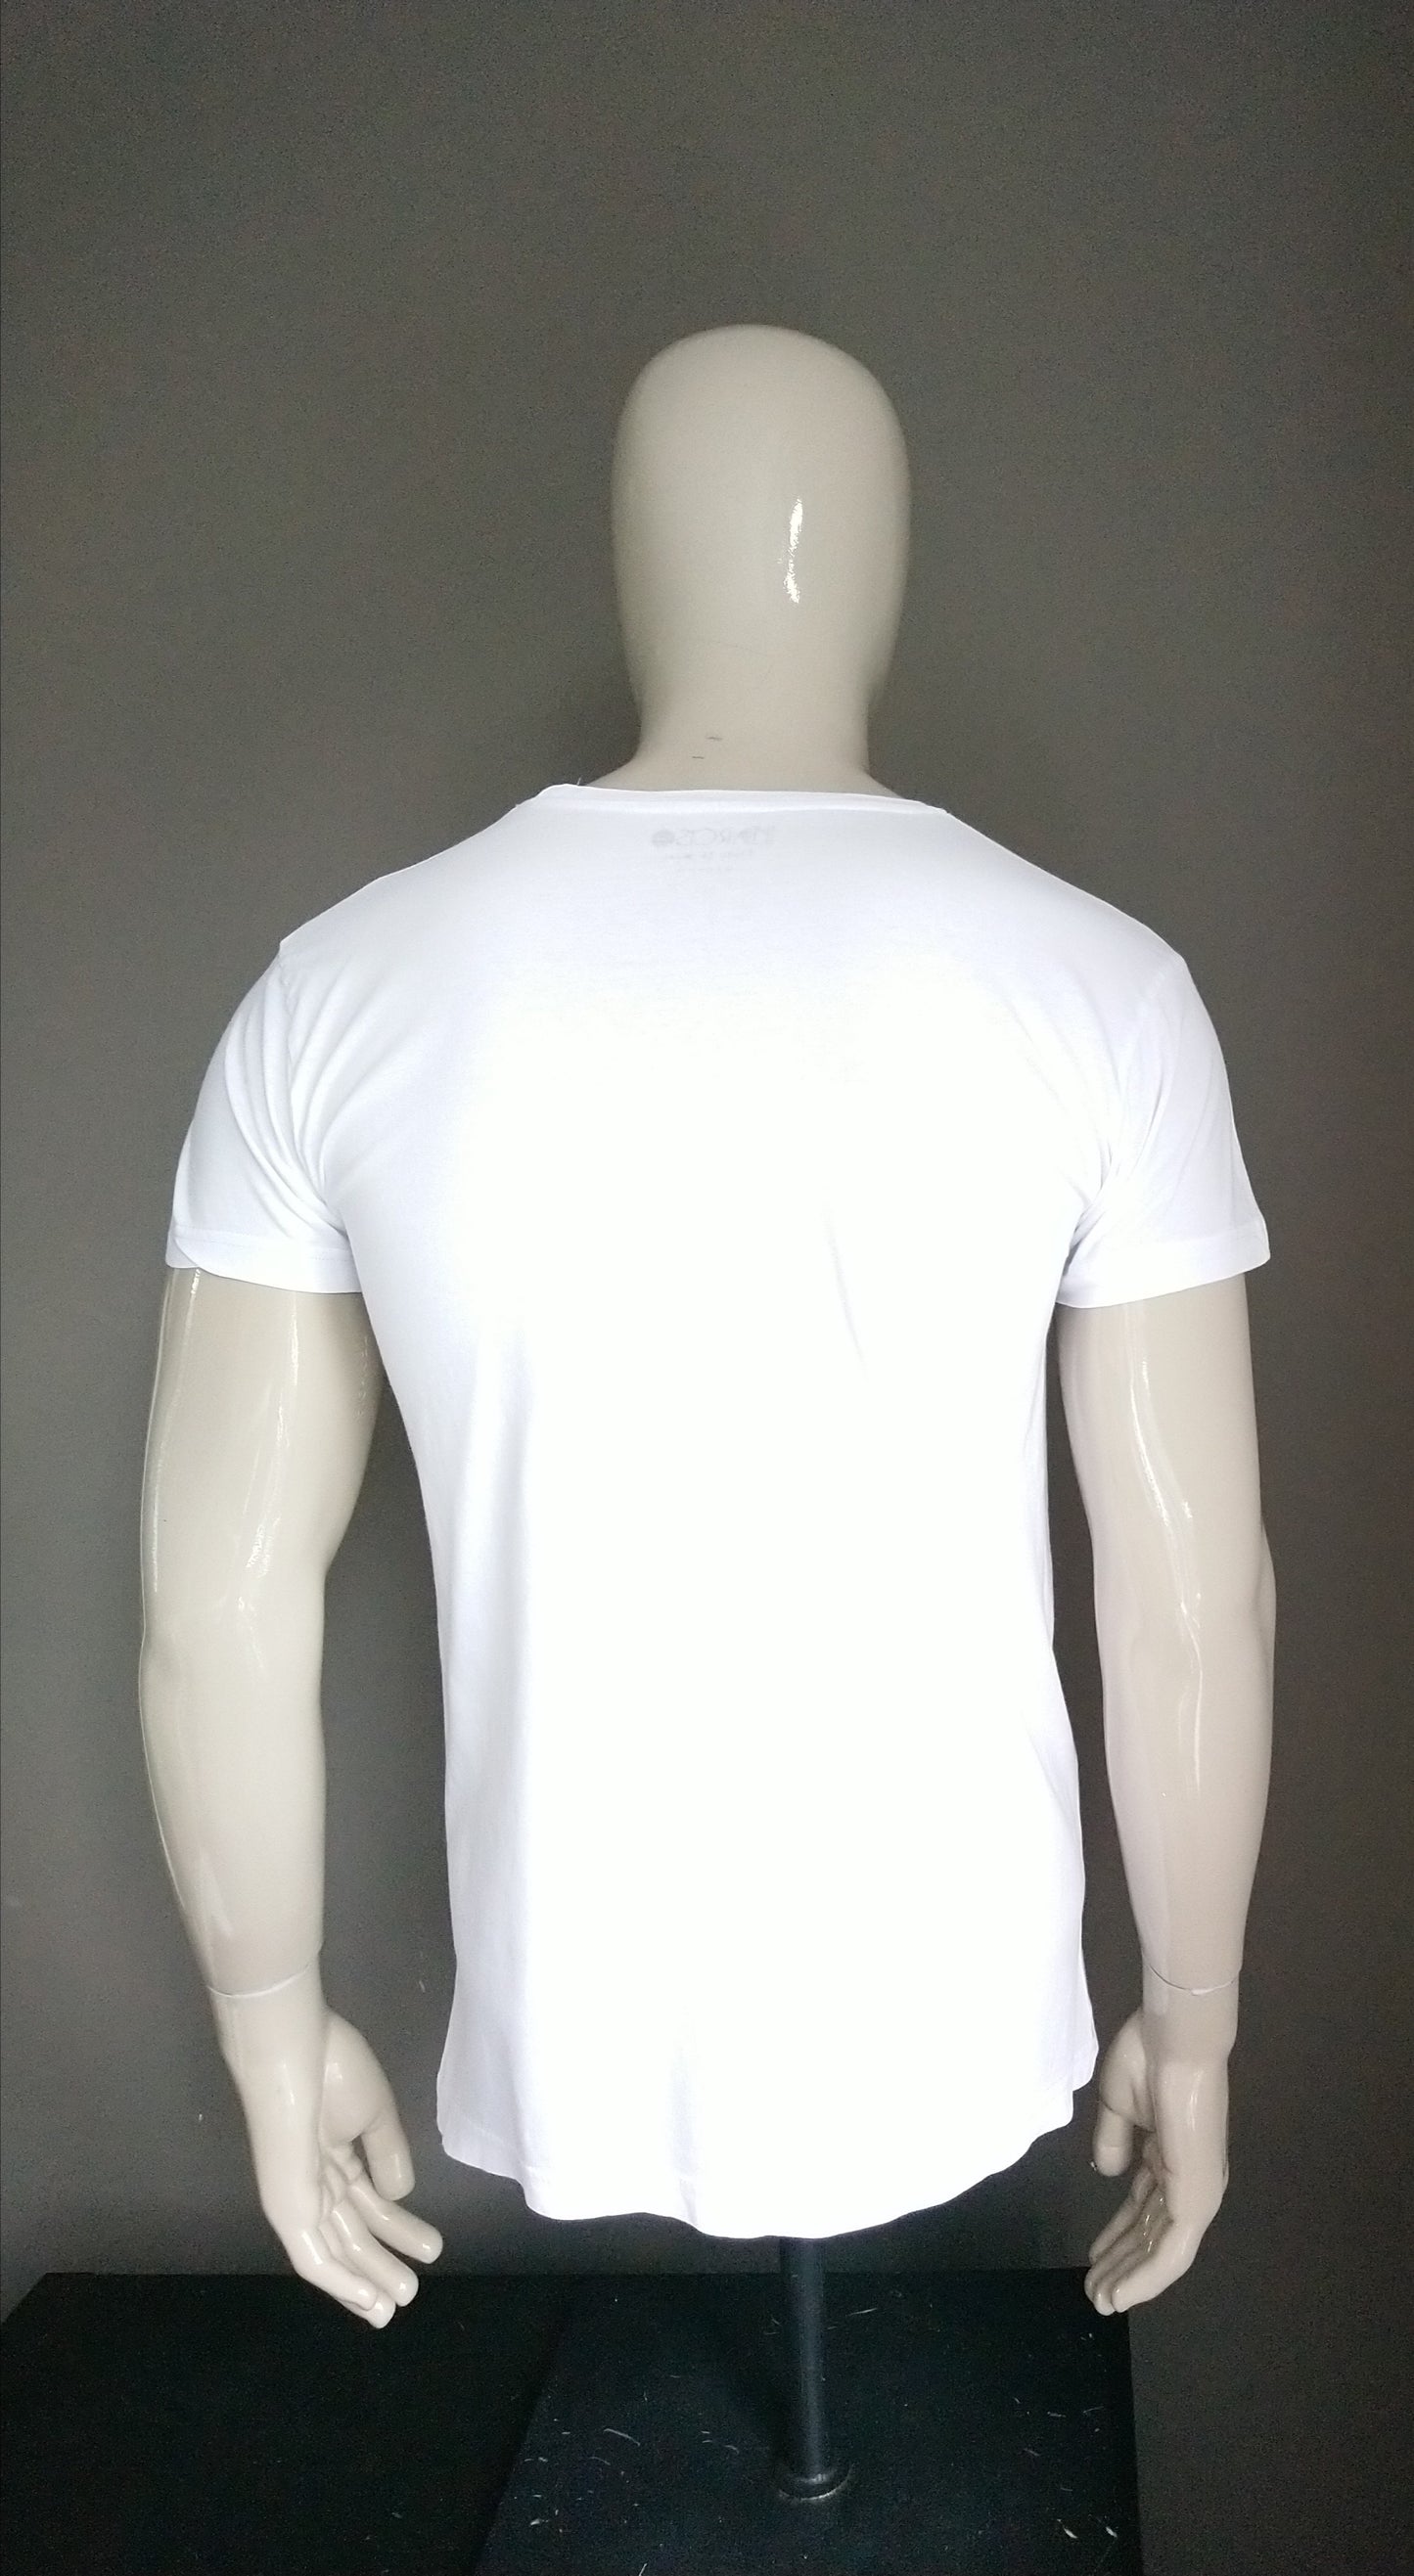 Narciso Ready to Wear shirt. White with print. Size M.